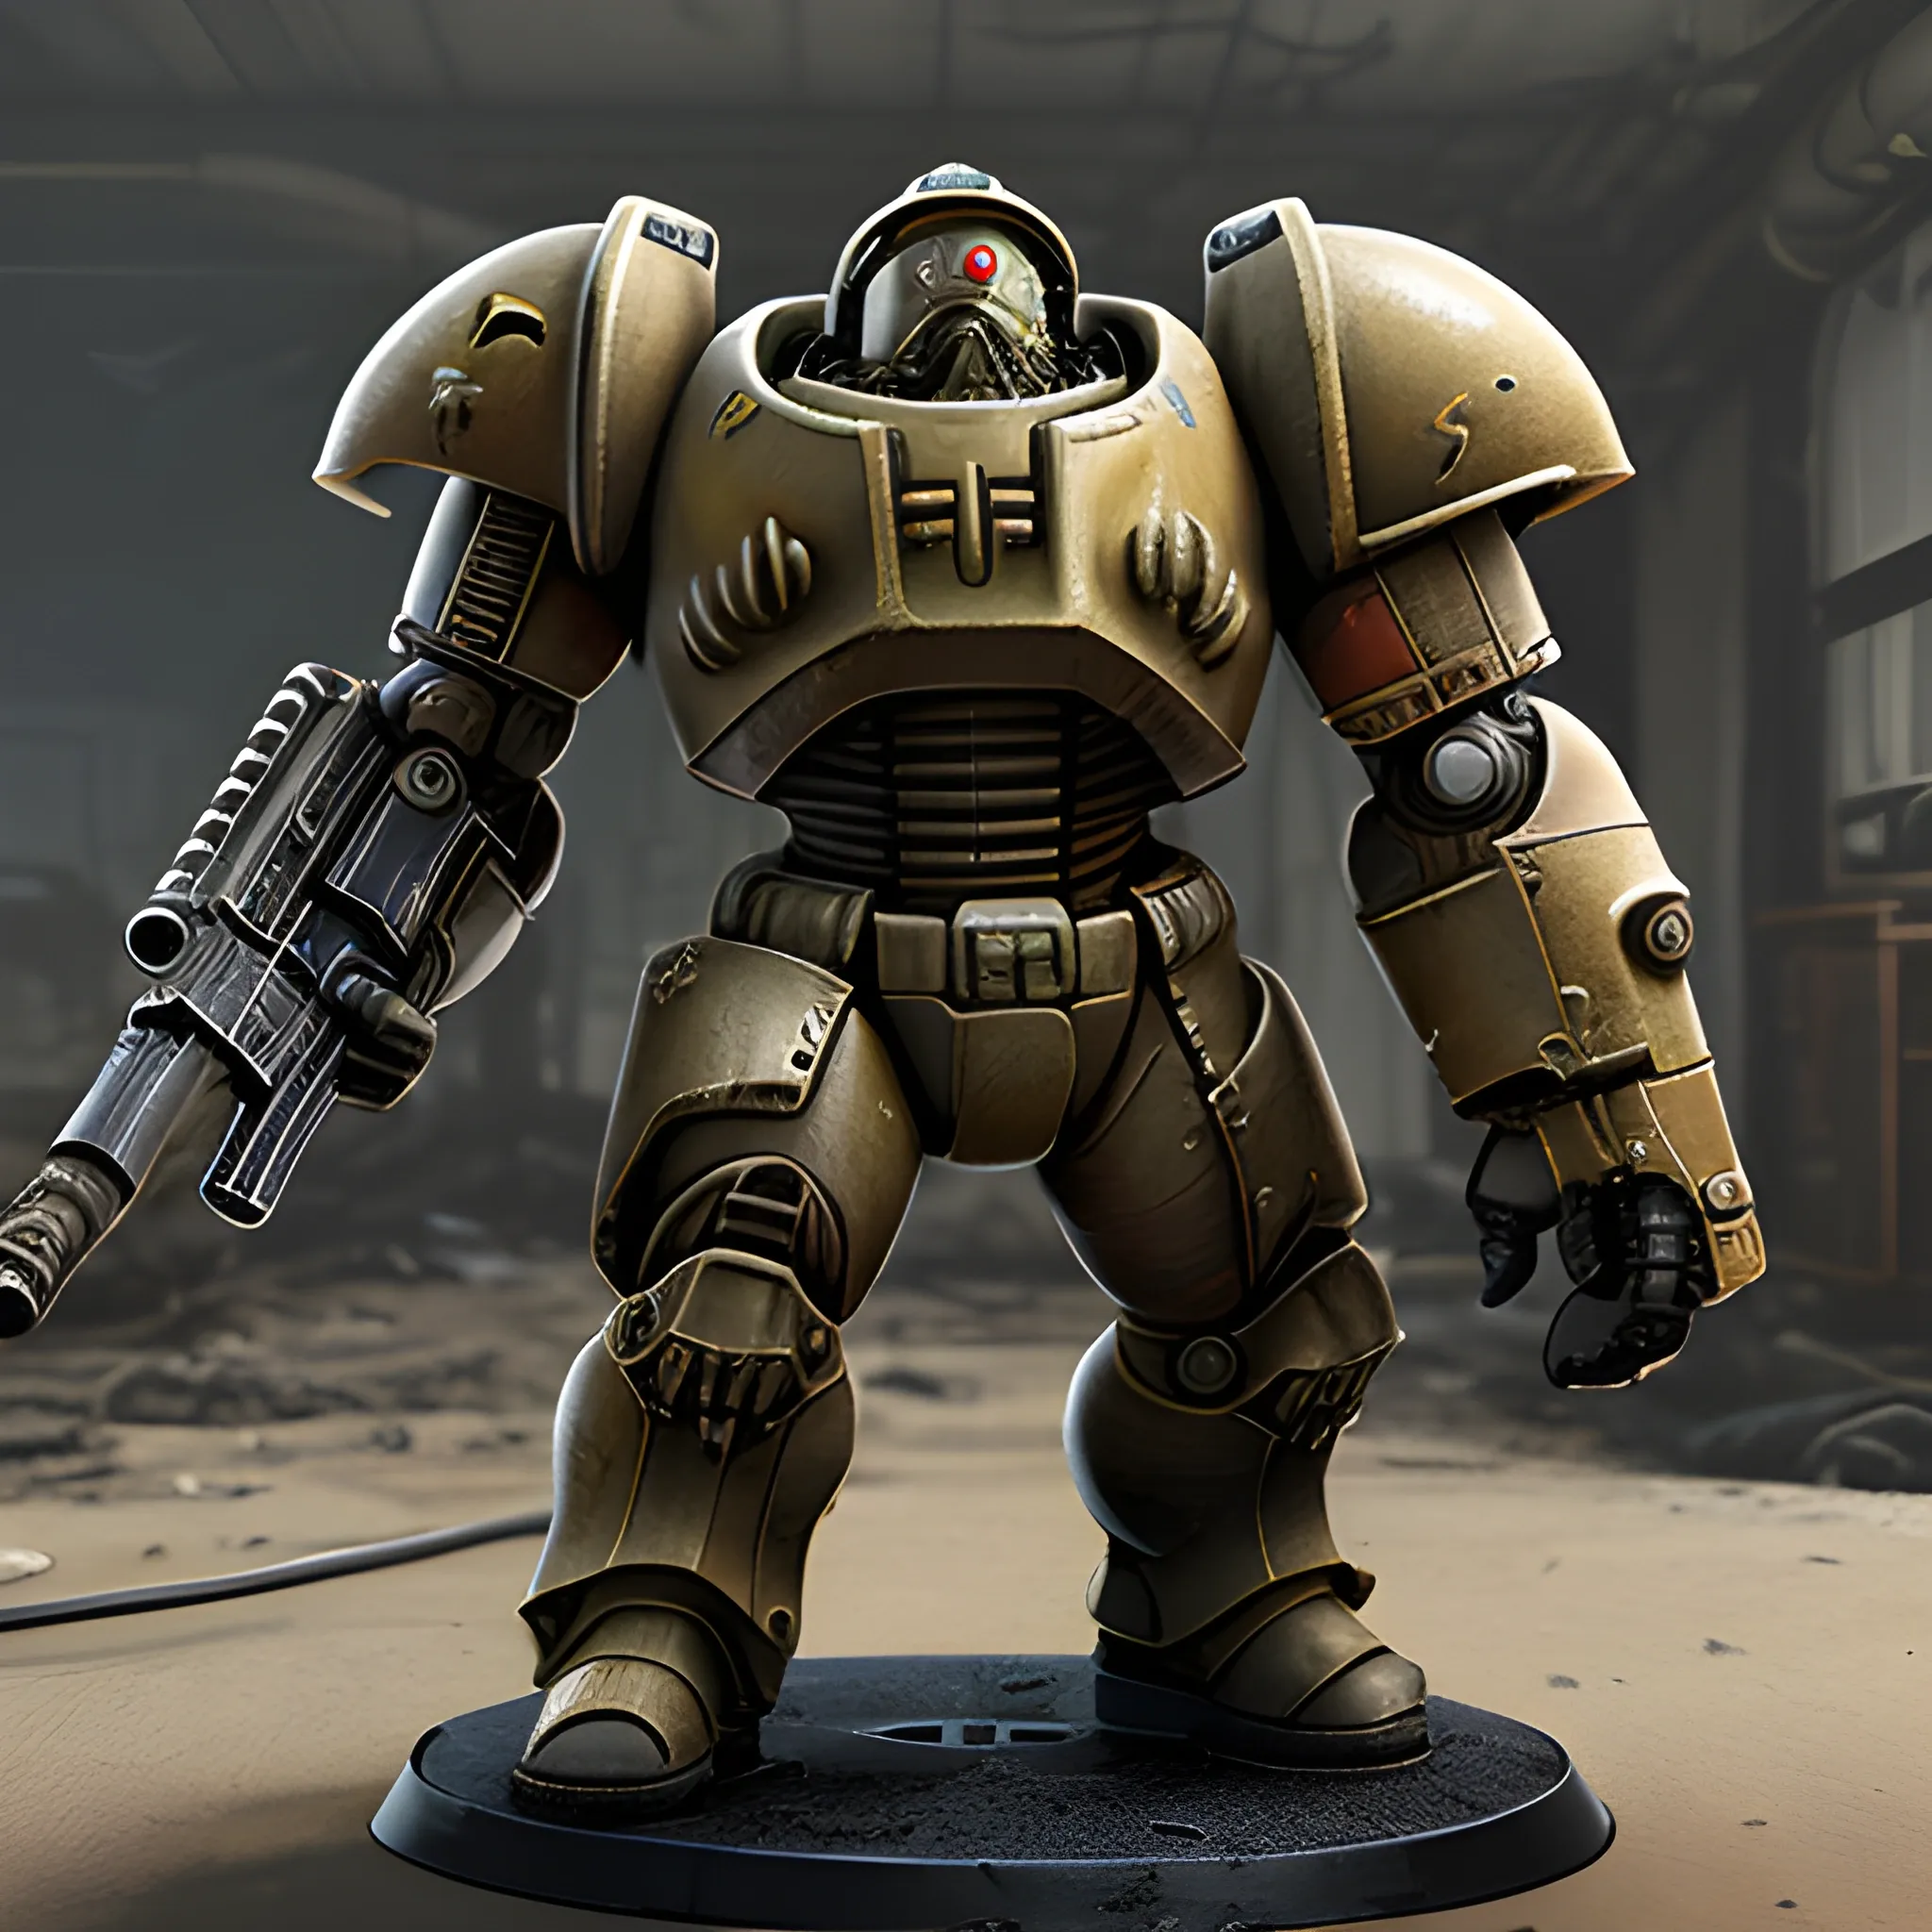 in the style of Fallout 4 masterpiece, warhemmer 40k's Peturabo as a Brotherhood of Steel paladin